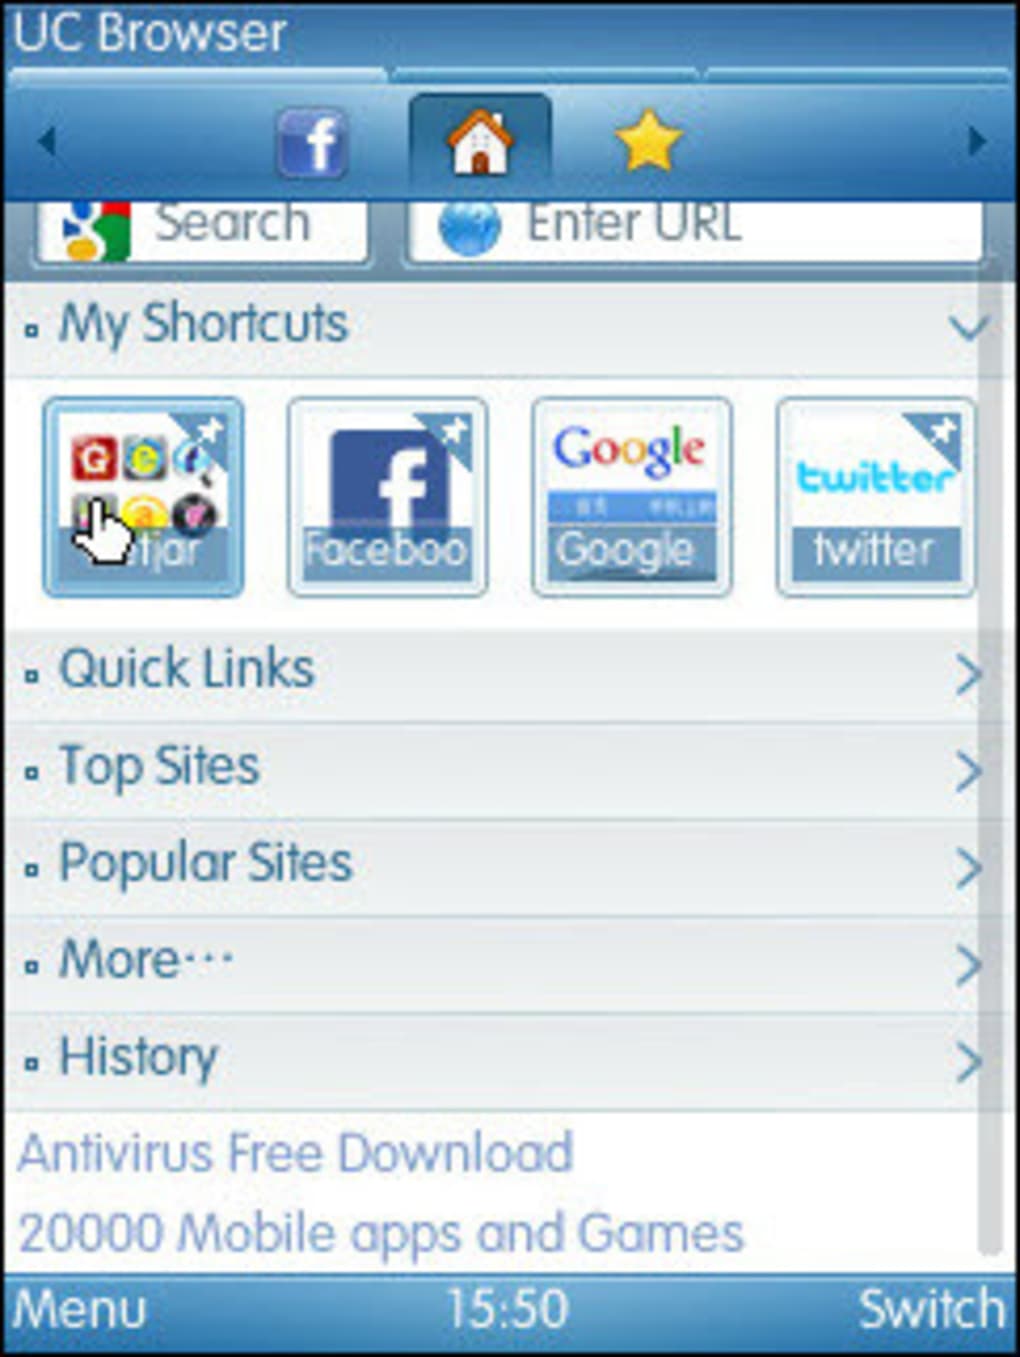 Download uc browser for windows 7 ultimate